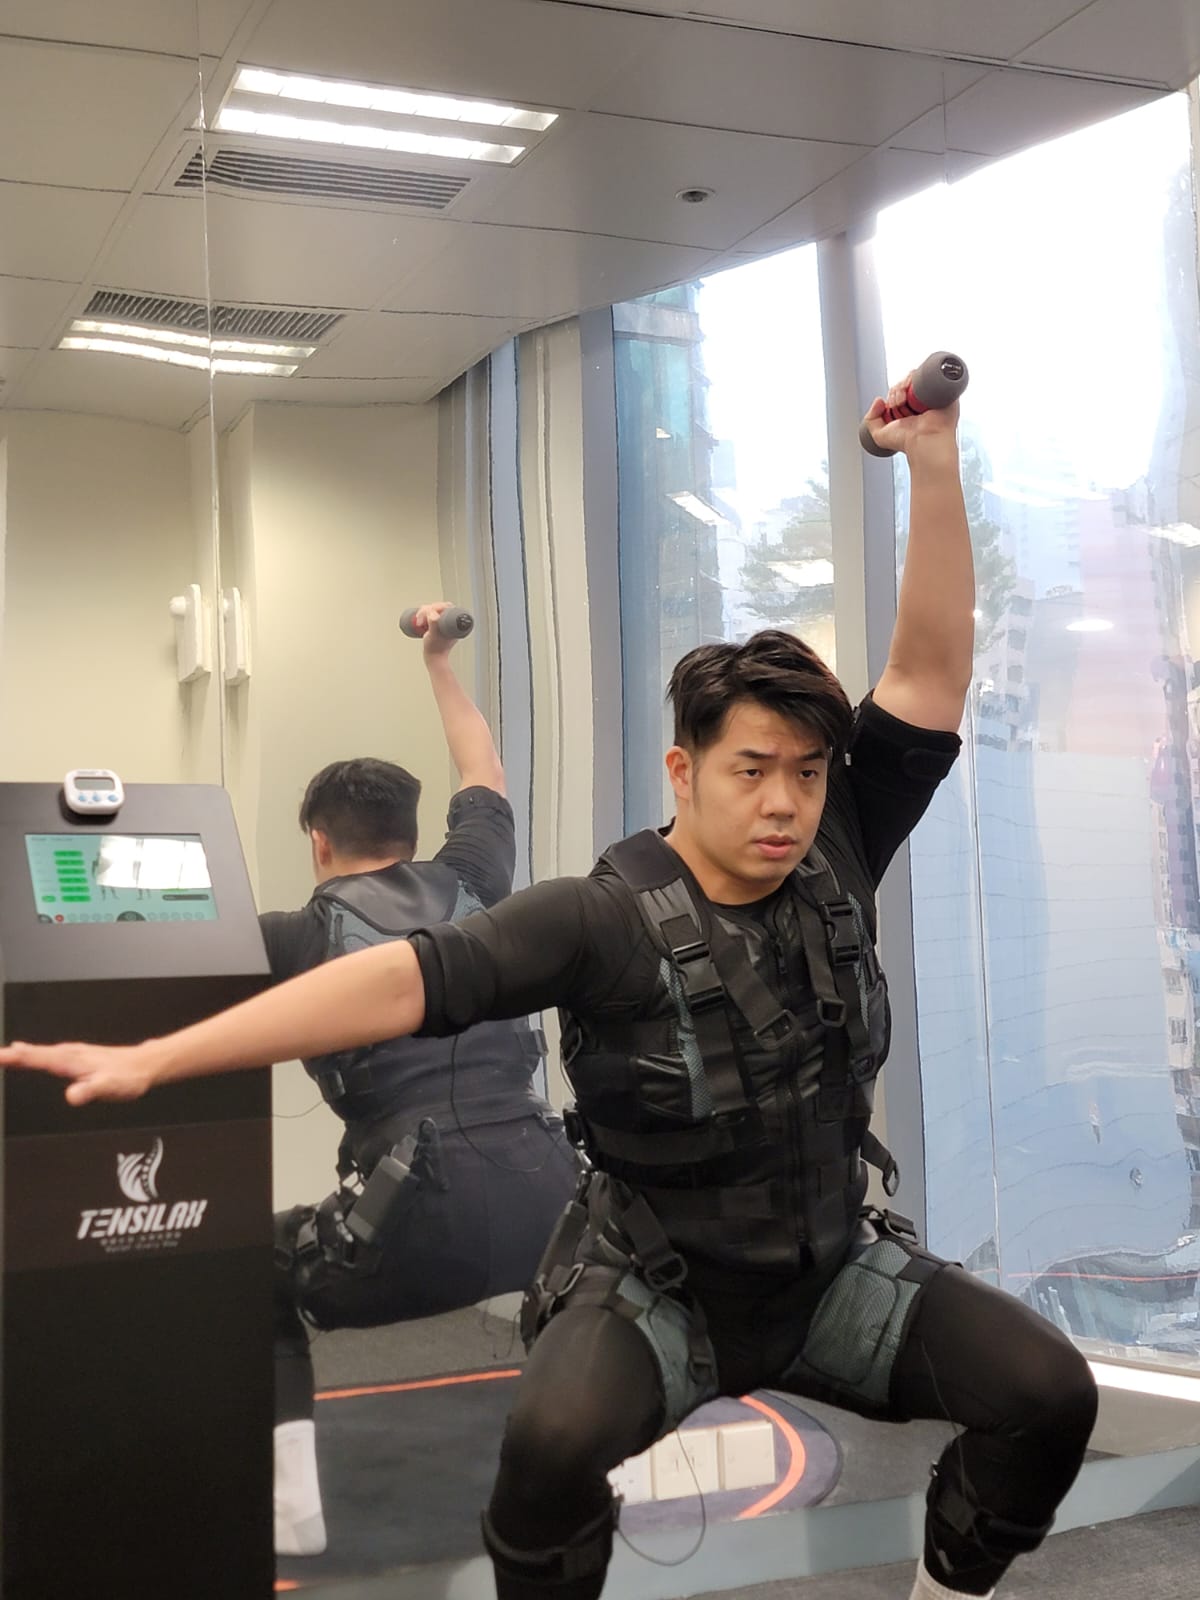 <img src="A male doing a a legs exercise with one arm overhead press with a dumbbell, wearing electric suits stimulating="男子示範單臂使用啞鈴，並身穿電刺激衣服作刺激下肢訓練">